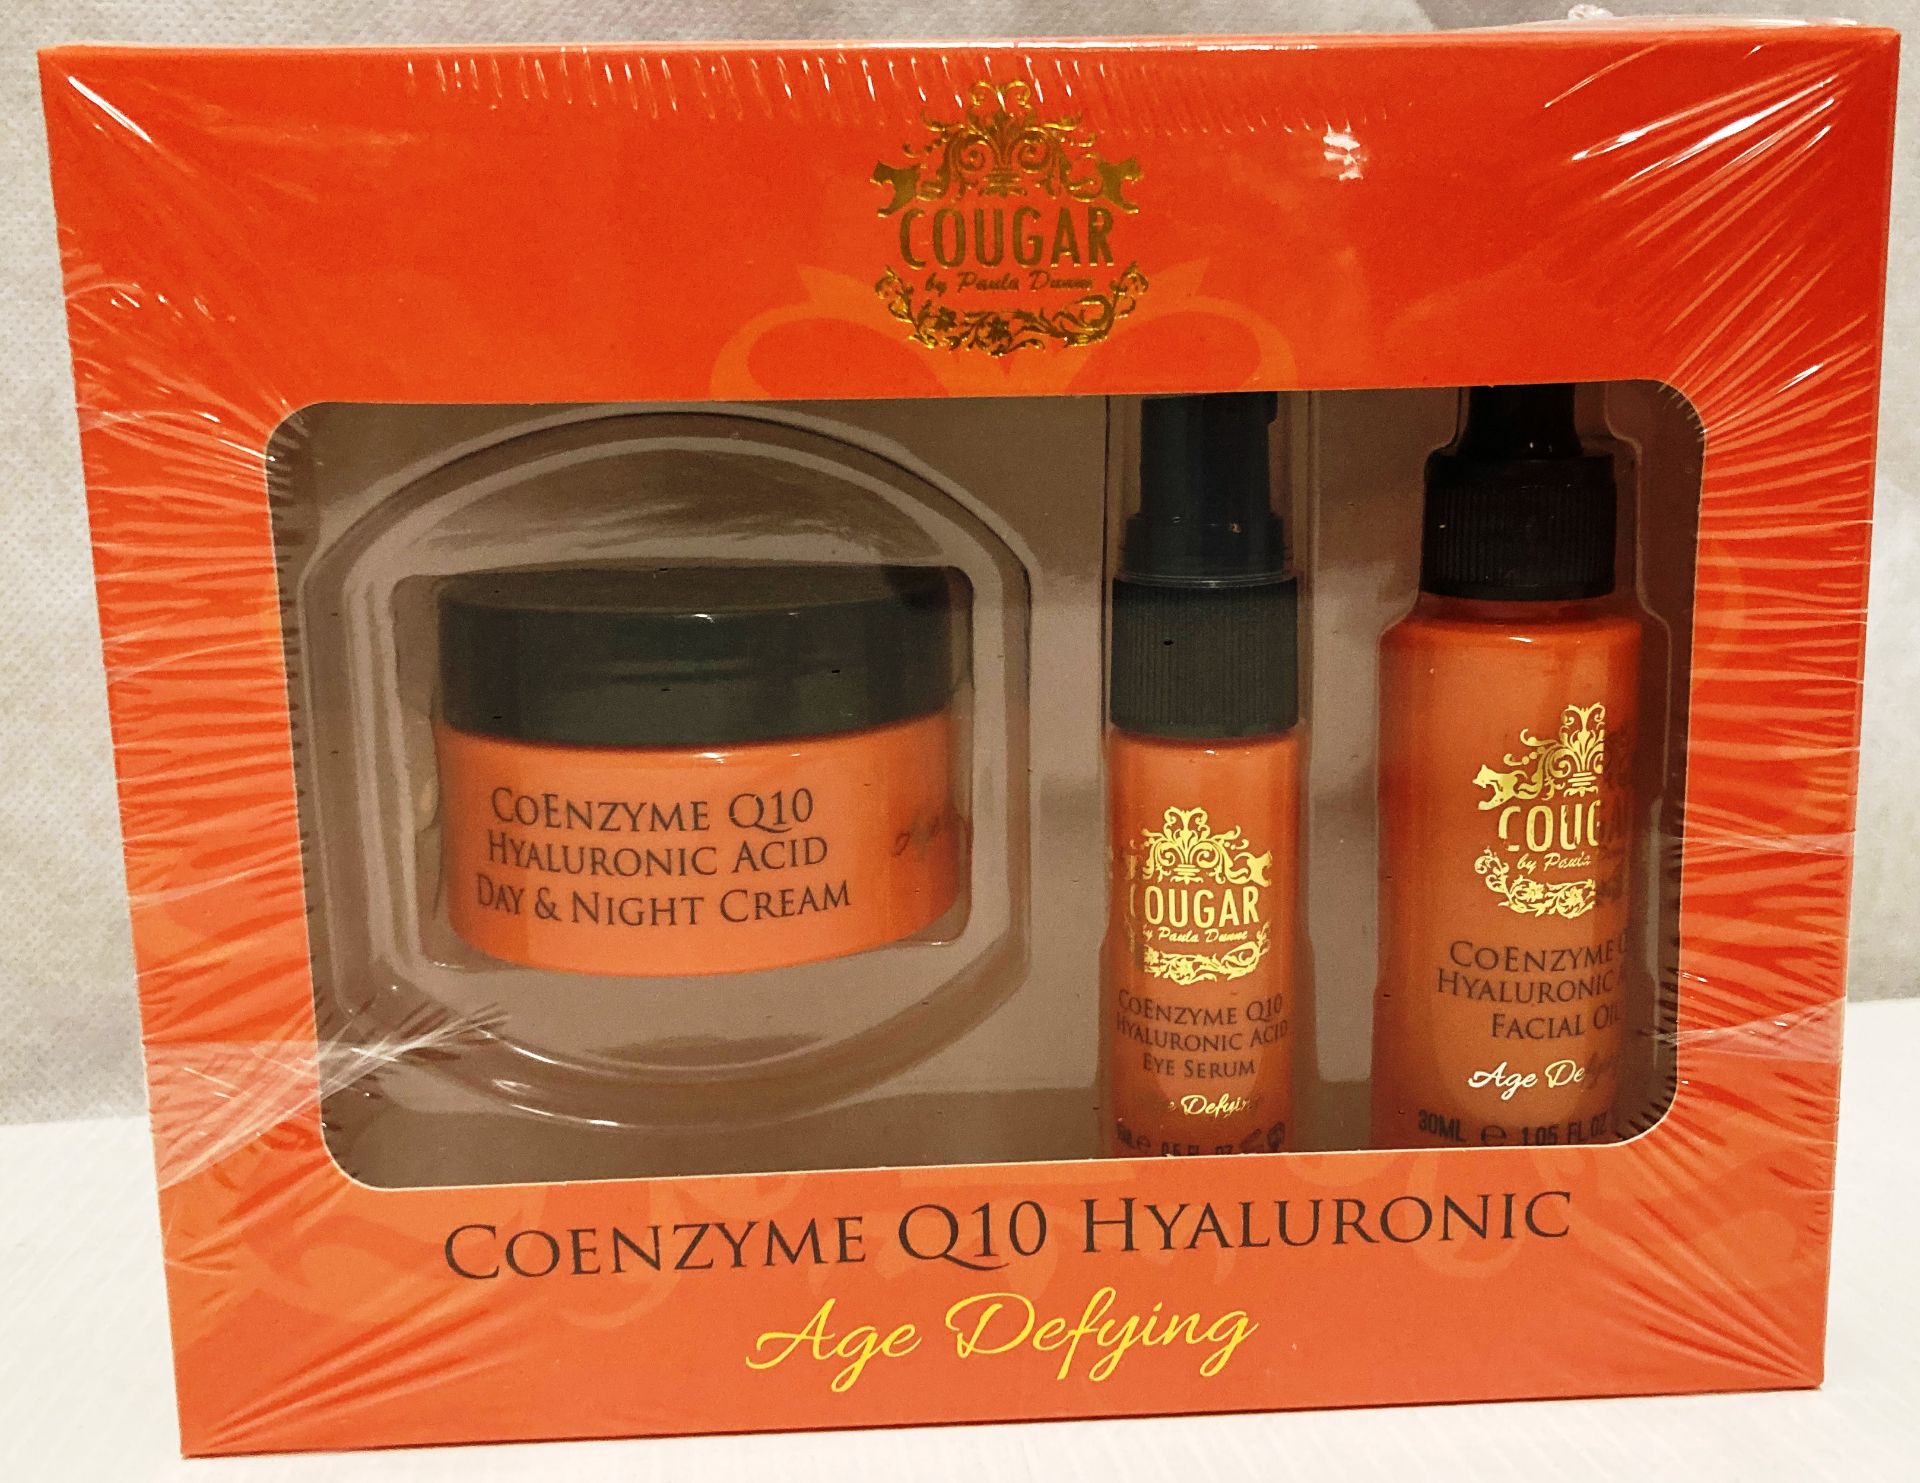 12 x Cougar Conzyme Q10 hyaluronic age defying sets